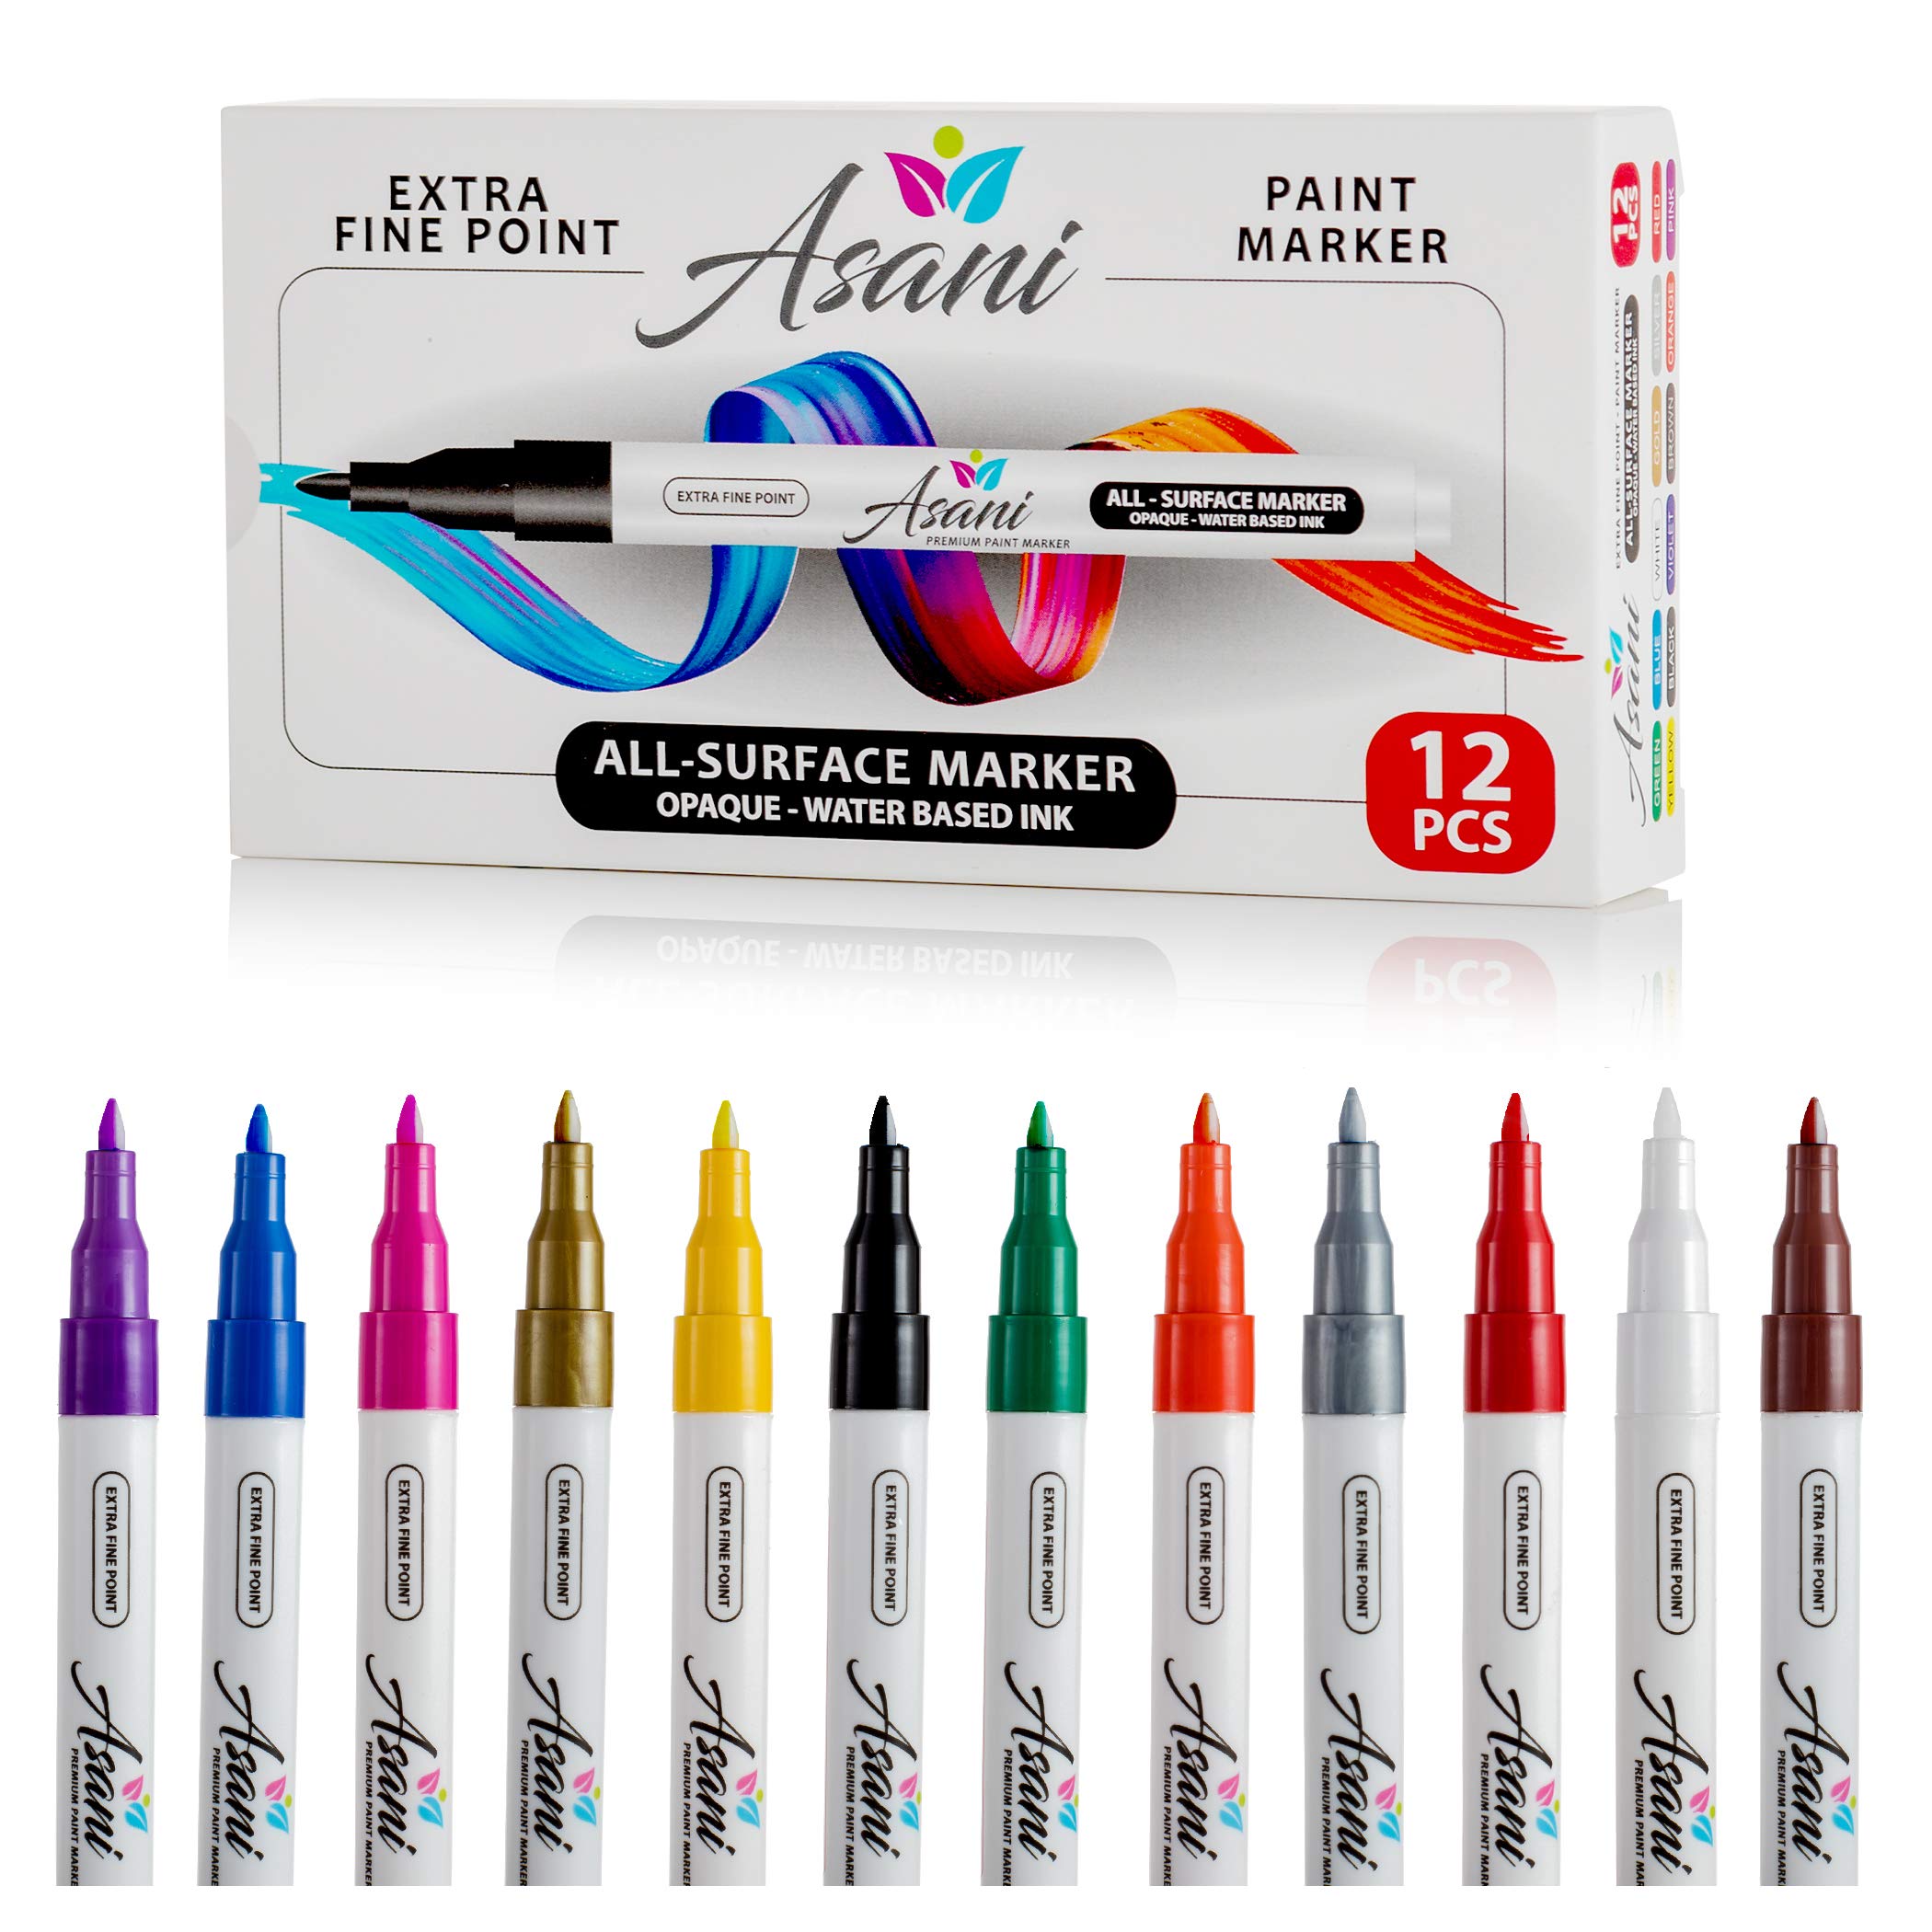 PINTAR Premium Acrylic Paint Pens - 1mm Fine Tip Pens For Rock Painting,  Ceramic, Glass, Wood, Craft Supplies, DIY Project (16 colors)